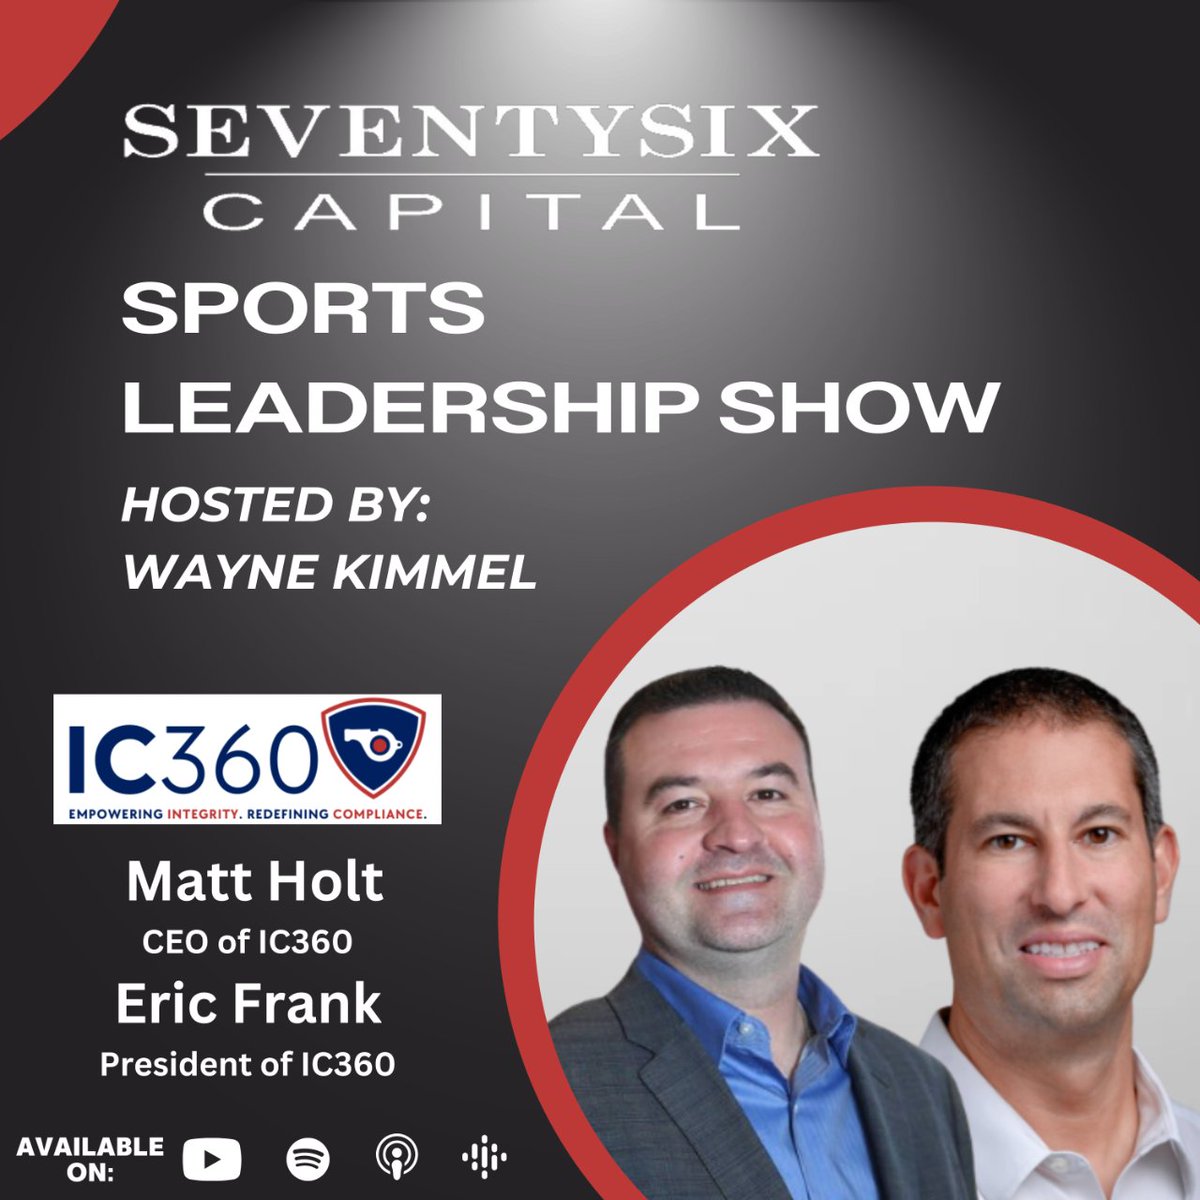 🎙 Tune into the latest episode of the SeventySix Capital Sports Leadership Show as @waynekimmel interviews @MatthewHoltUSI and @ericdanielfrank, the CEO and President of @_IC360. Full episode 👉 bit.ly/SSCSLS #SportsTechVC #Sportsbiz #SportsBetting #IC360 #Compliance